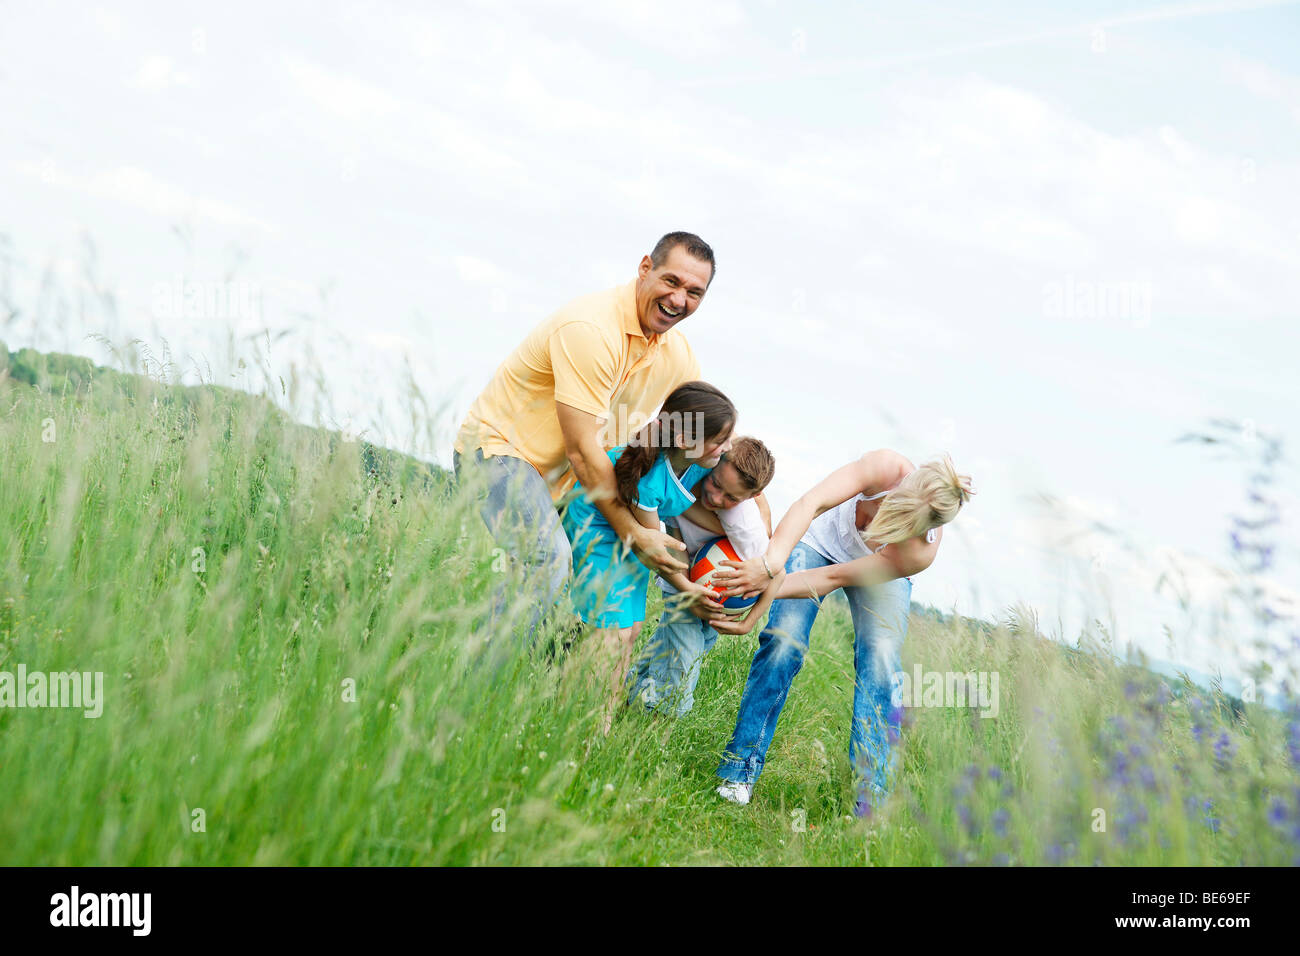 Family playing on a meadow Stock Photo